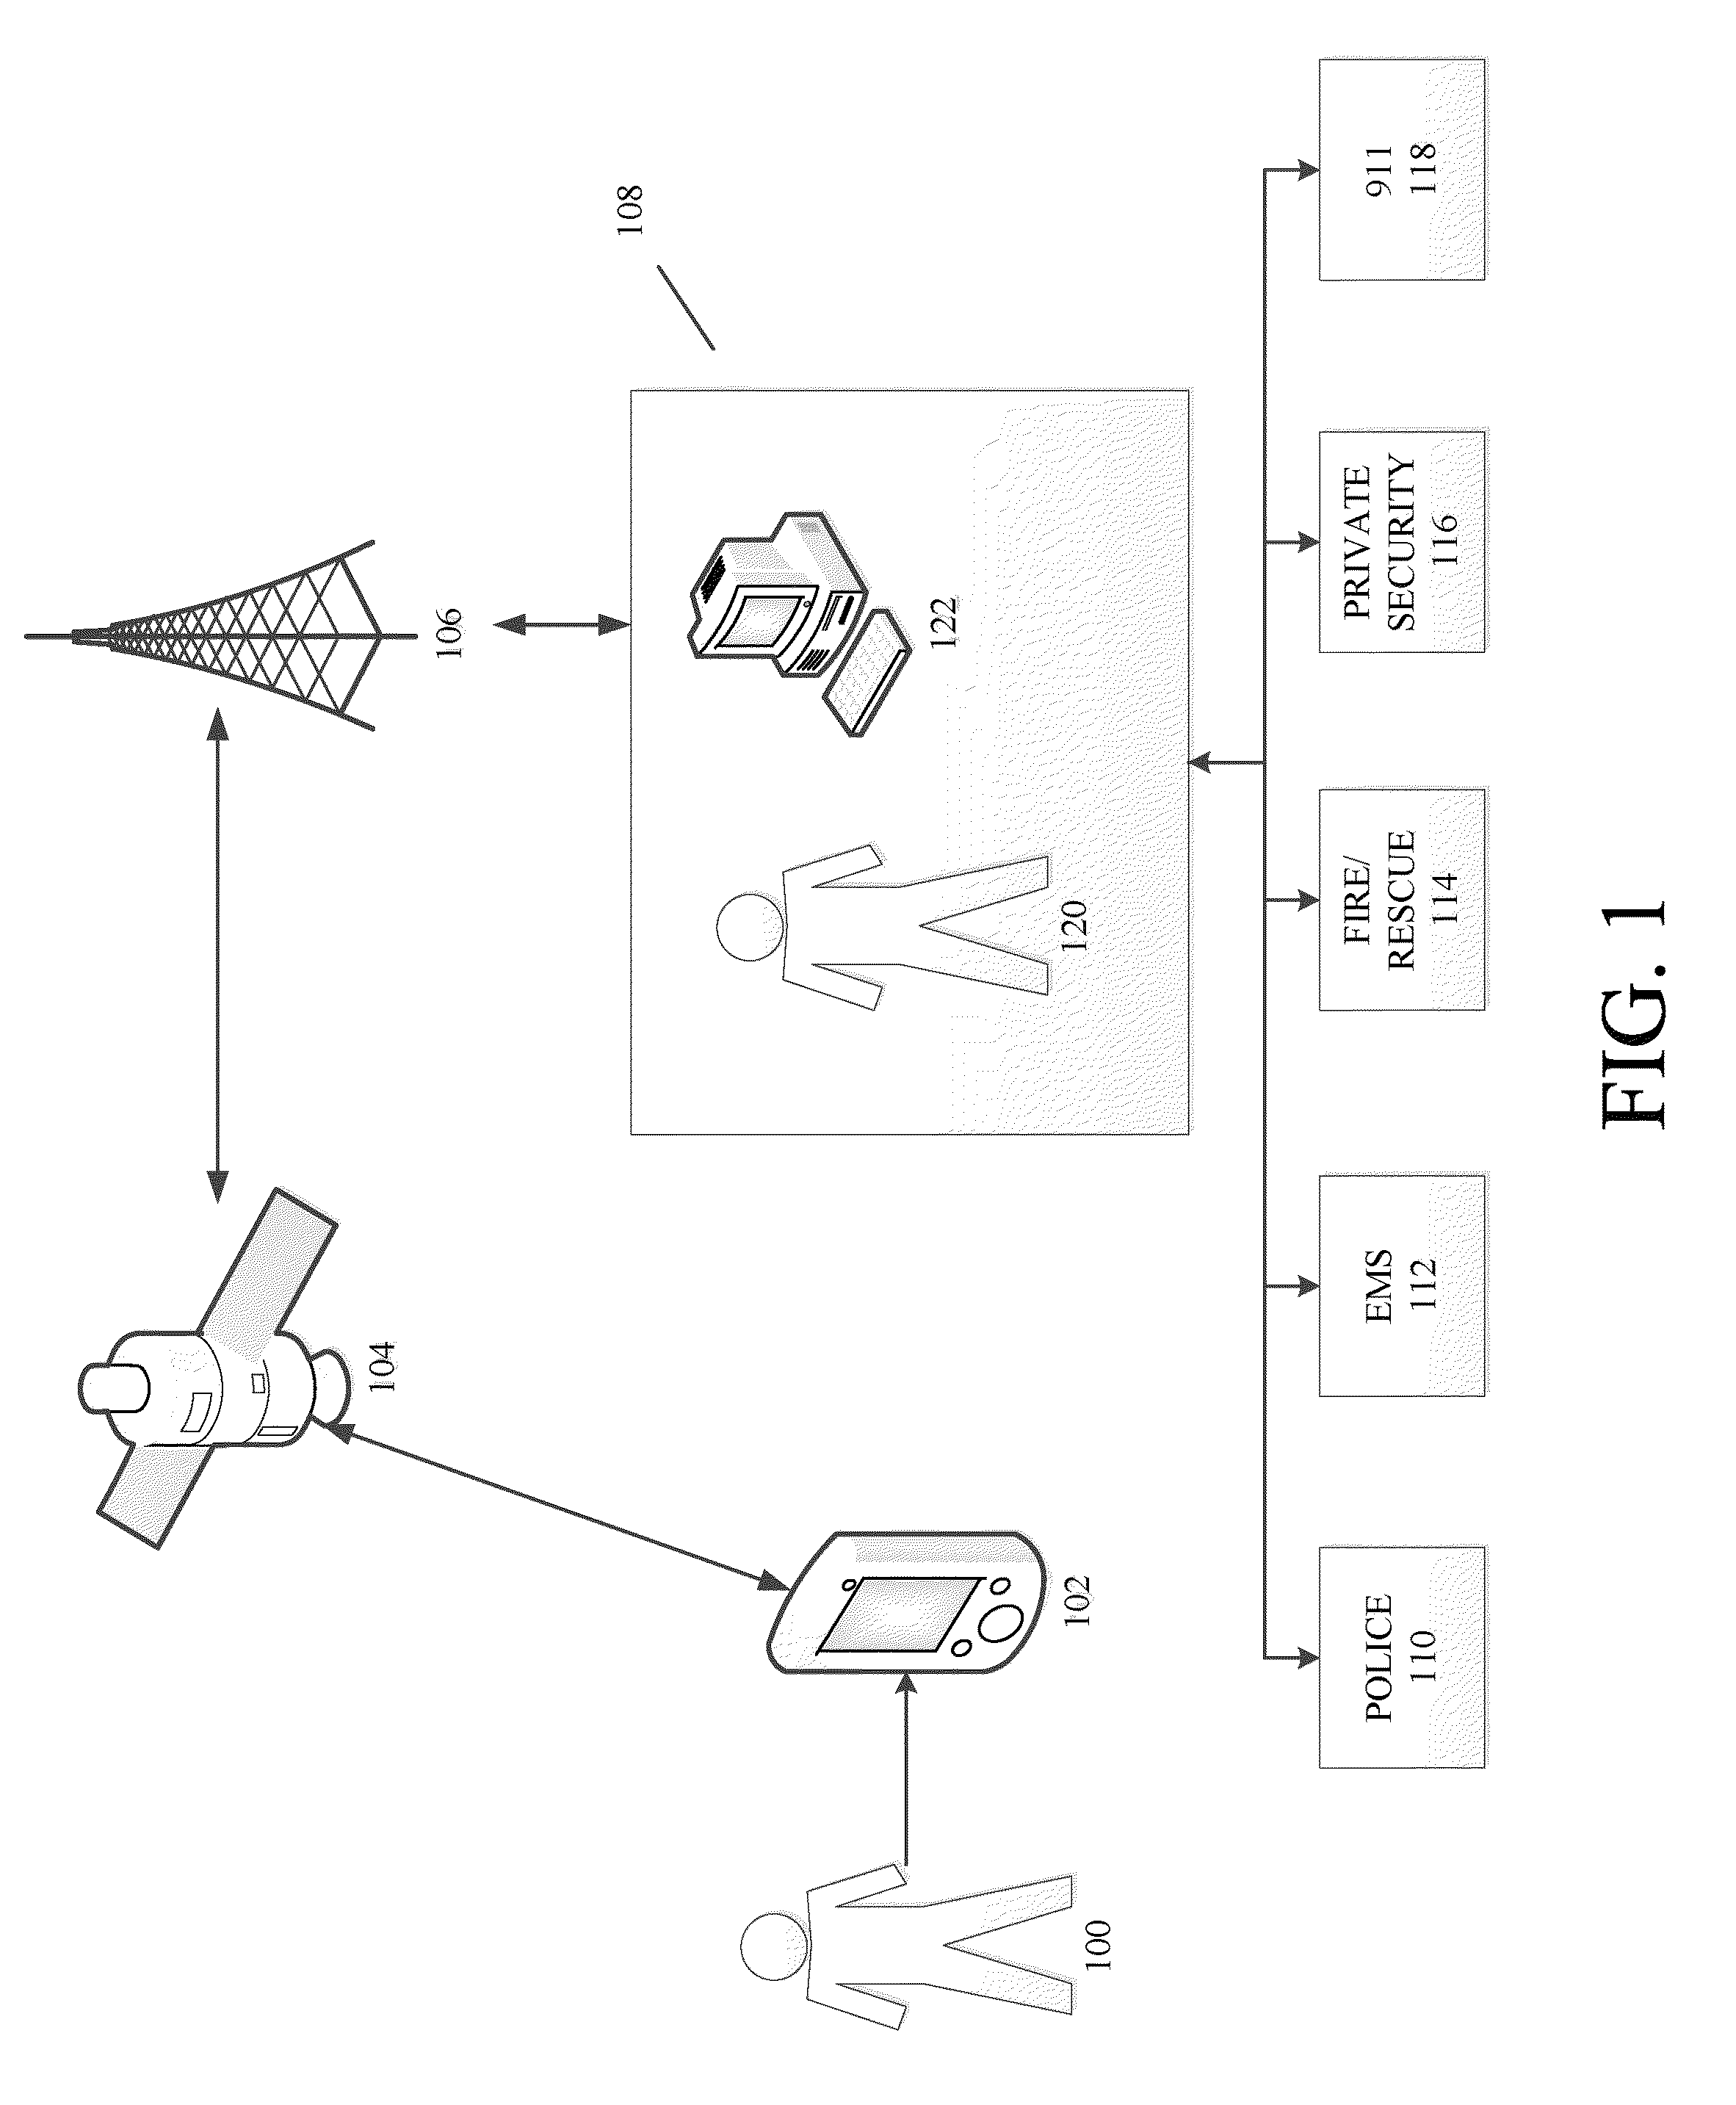 Methods and systems for threat assessment, safety management, and monitoring of individuals and groups